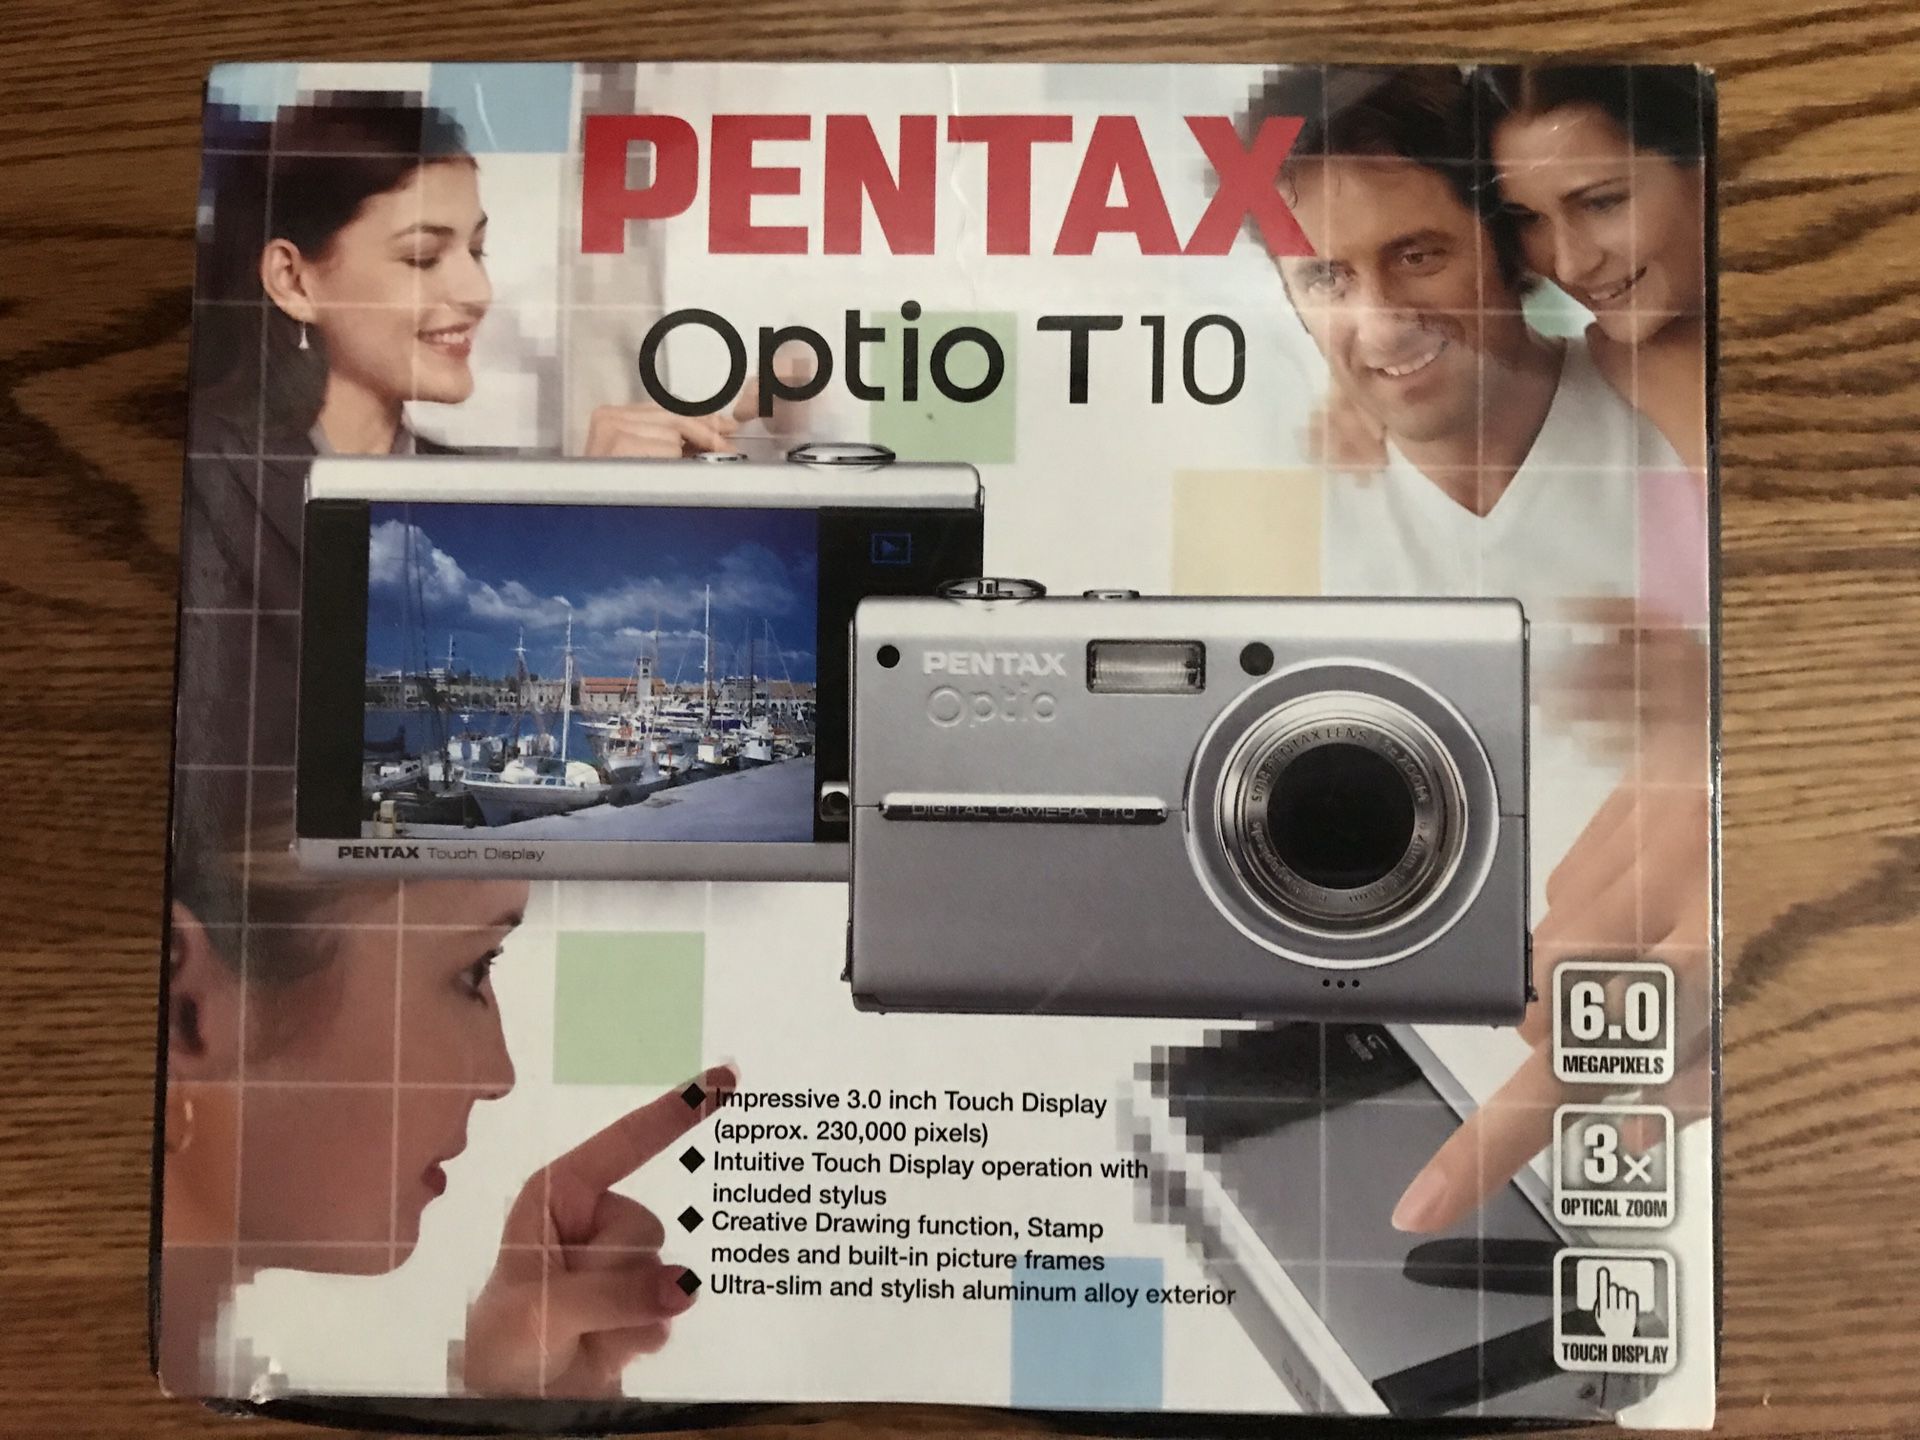 Pentax Optio T10 Digital Camera , 6.0 mega pixels, 3.0 optical zoom, touch display, digital, like new box, instruction manual and strap only, camera